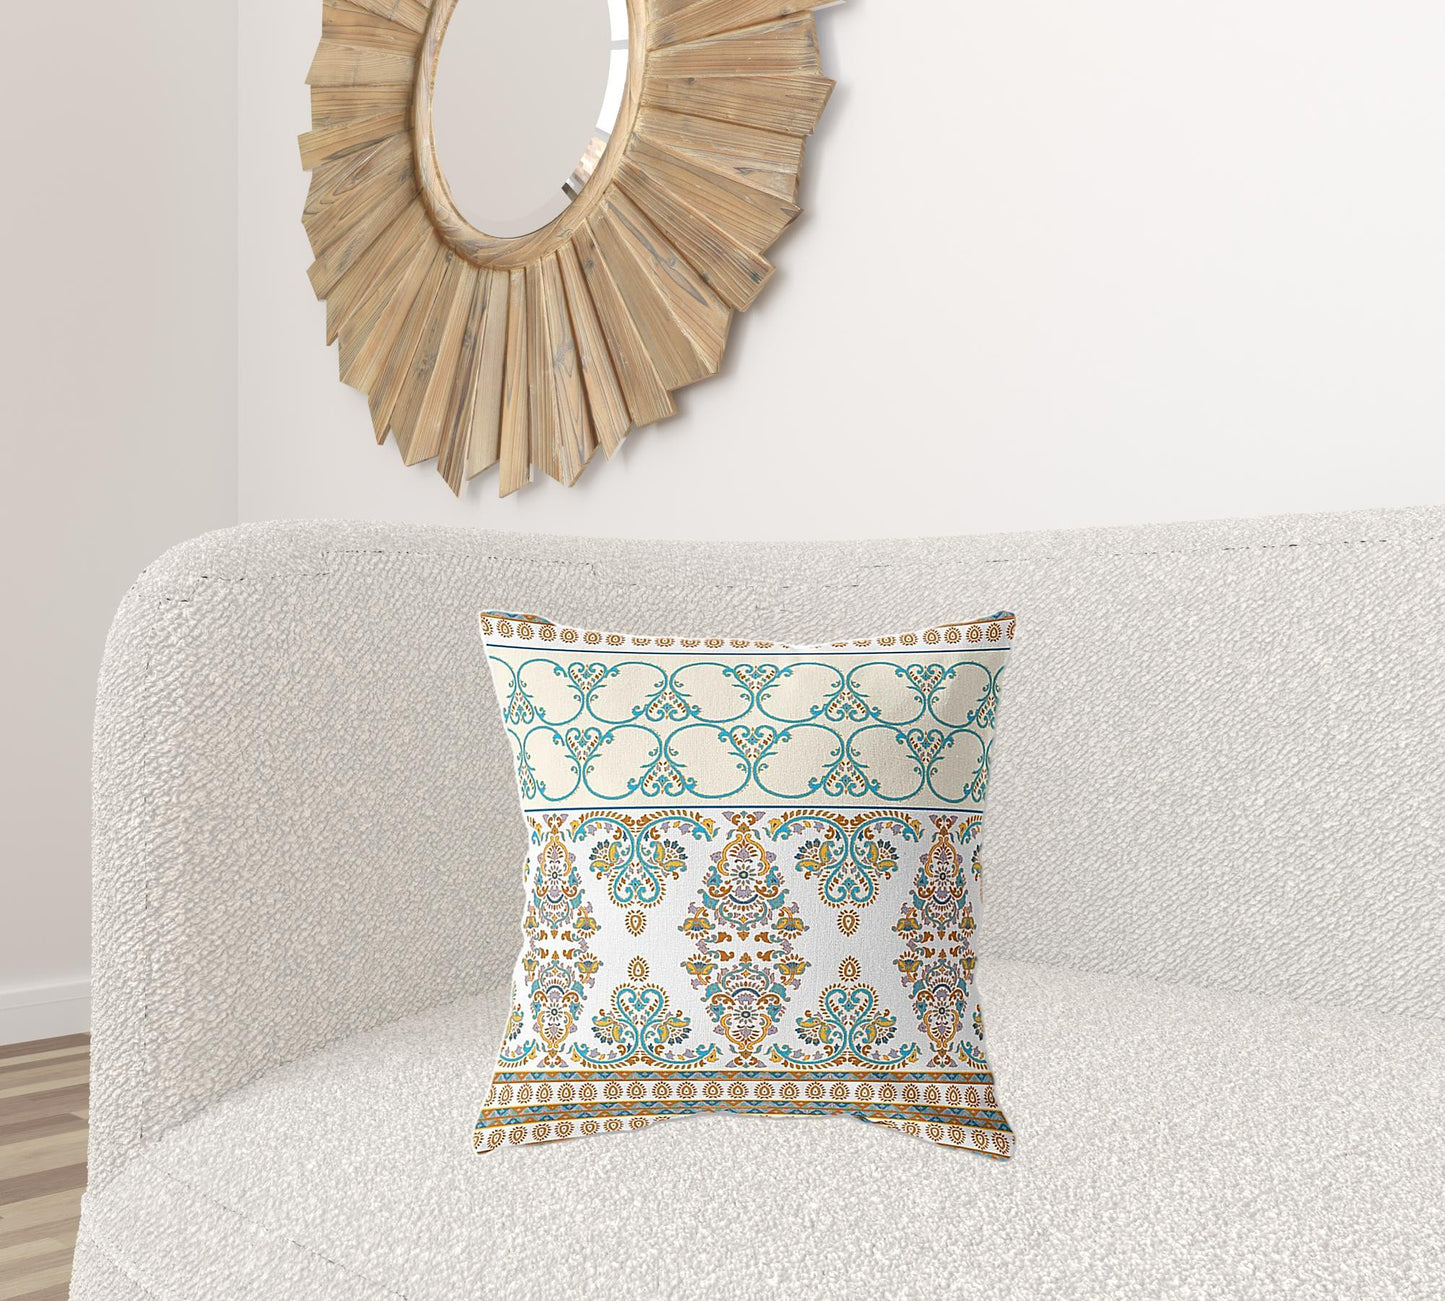 18" X 18" White And Blue Zippered Damask Indoor Outdoor Throw Pillow